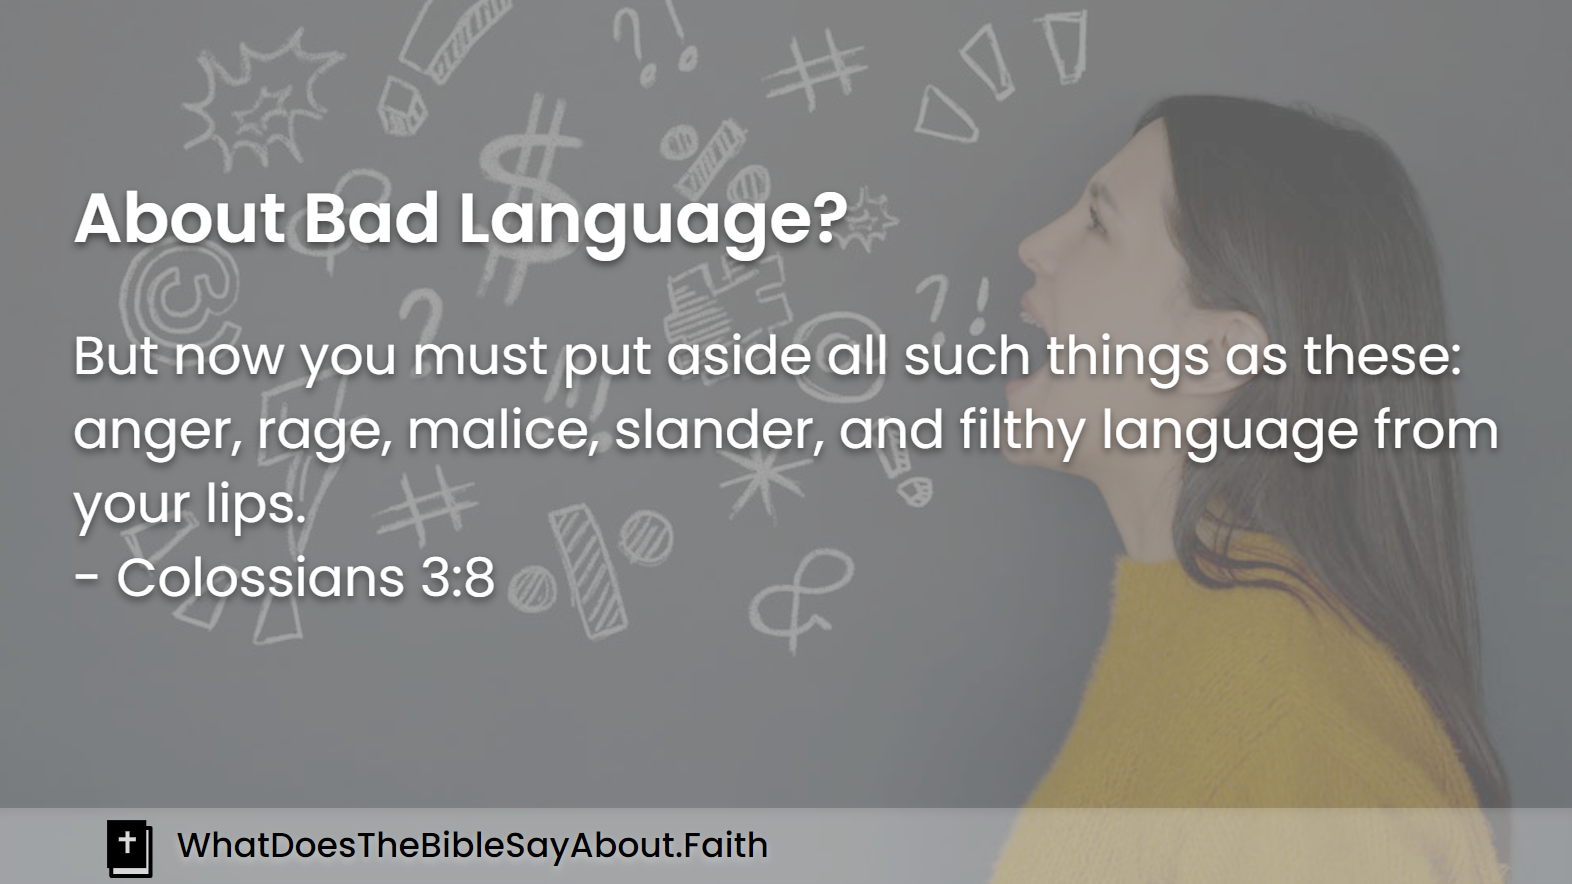 What Does The Bible Say About Bad Language